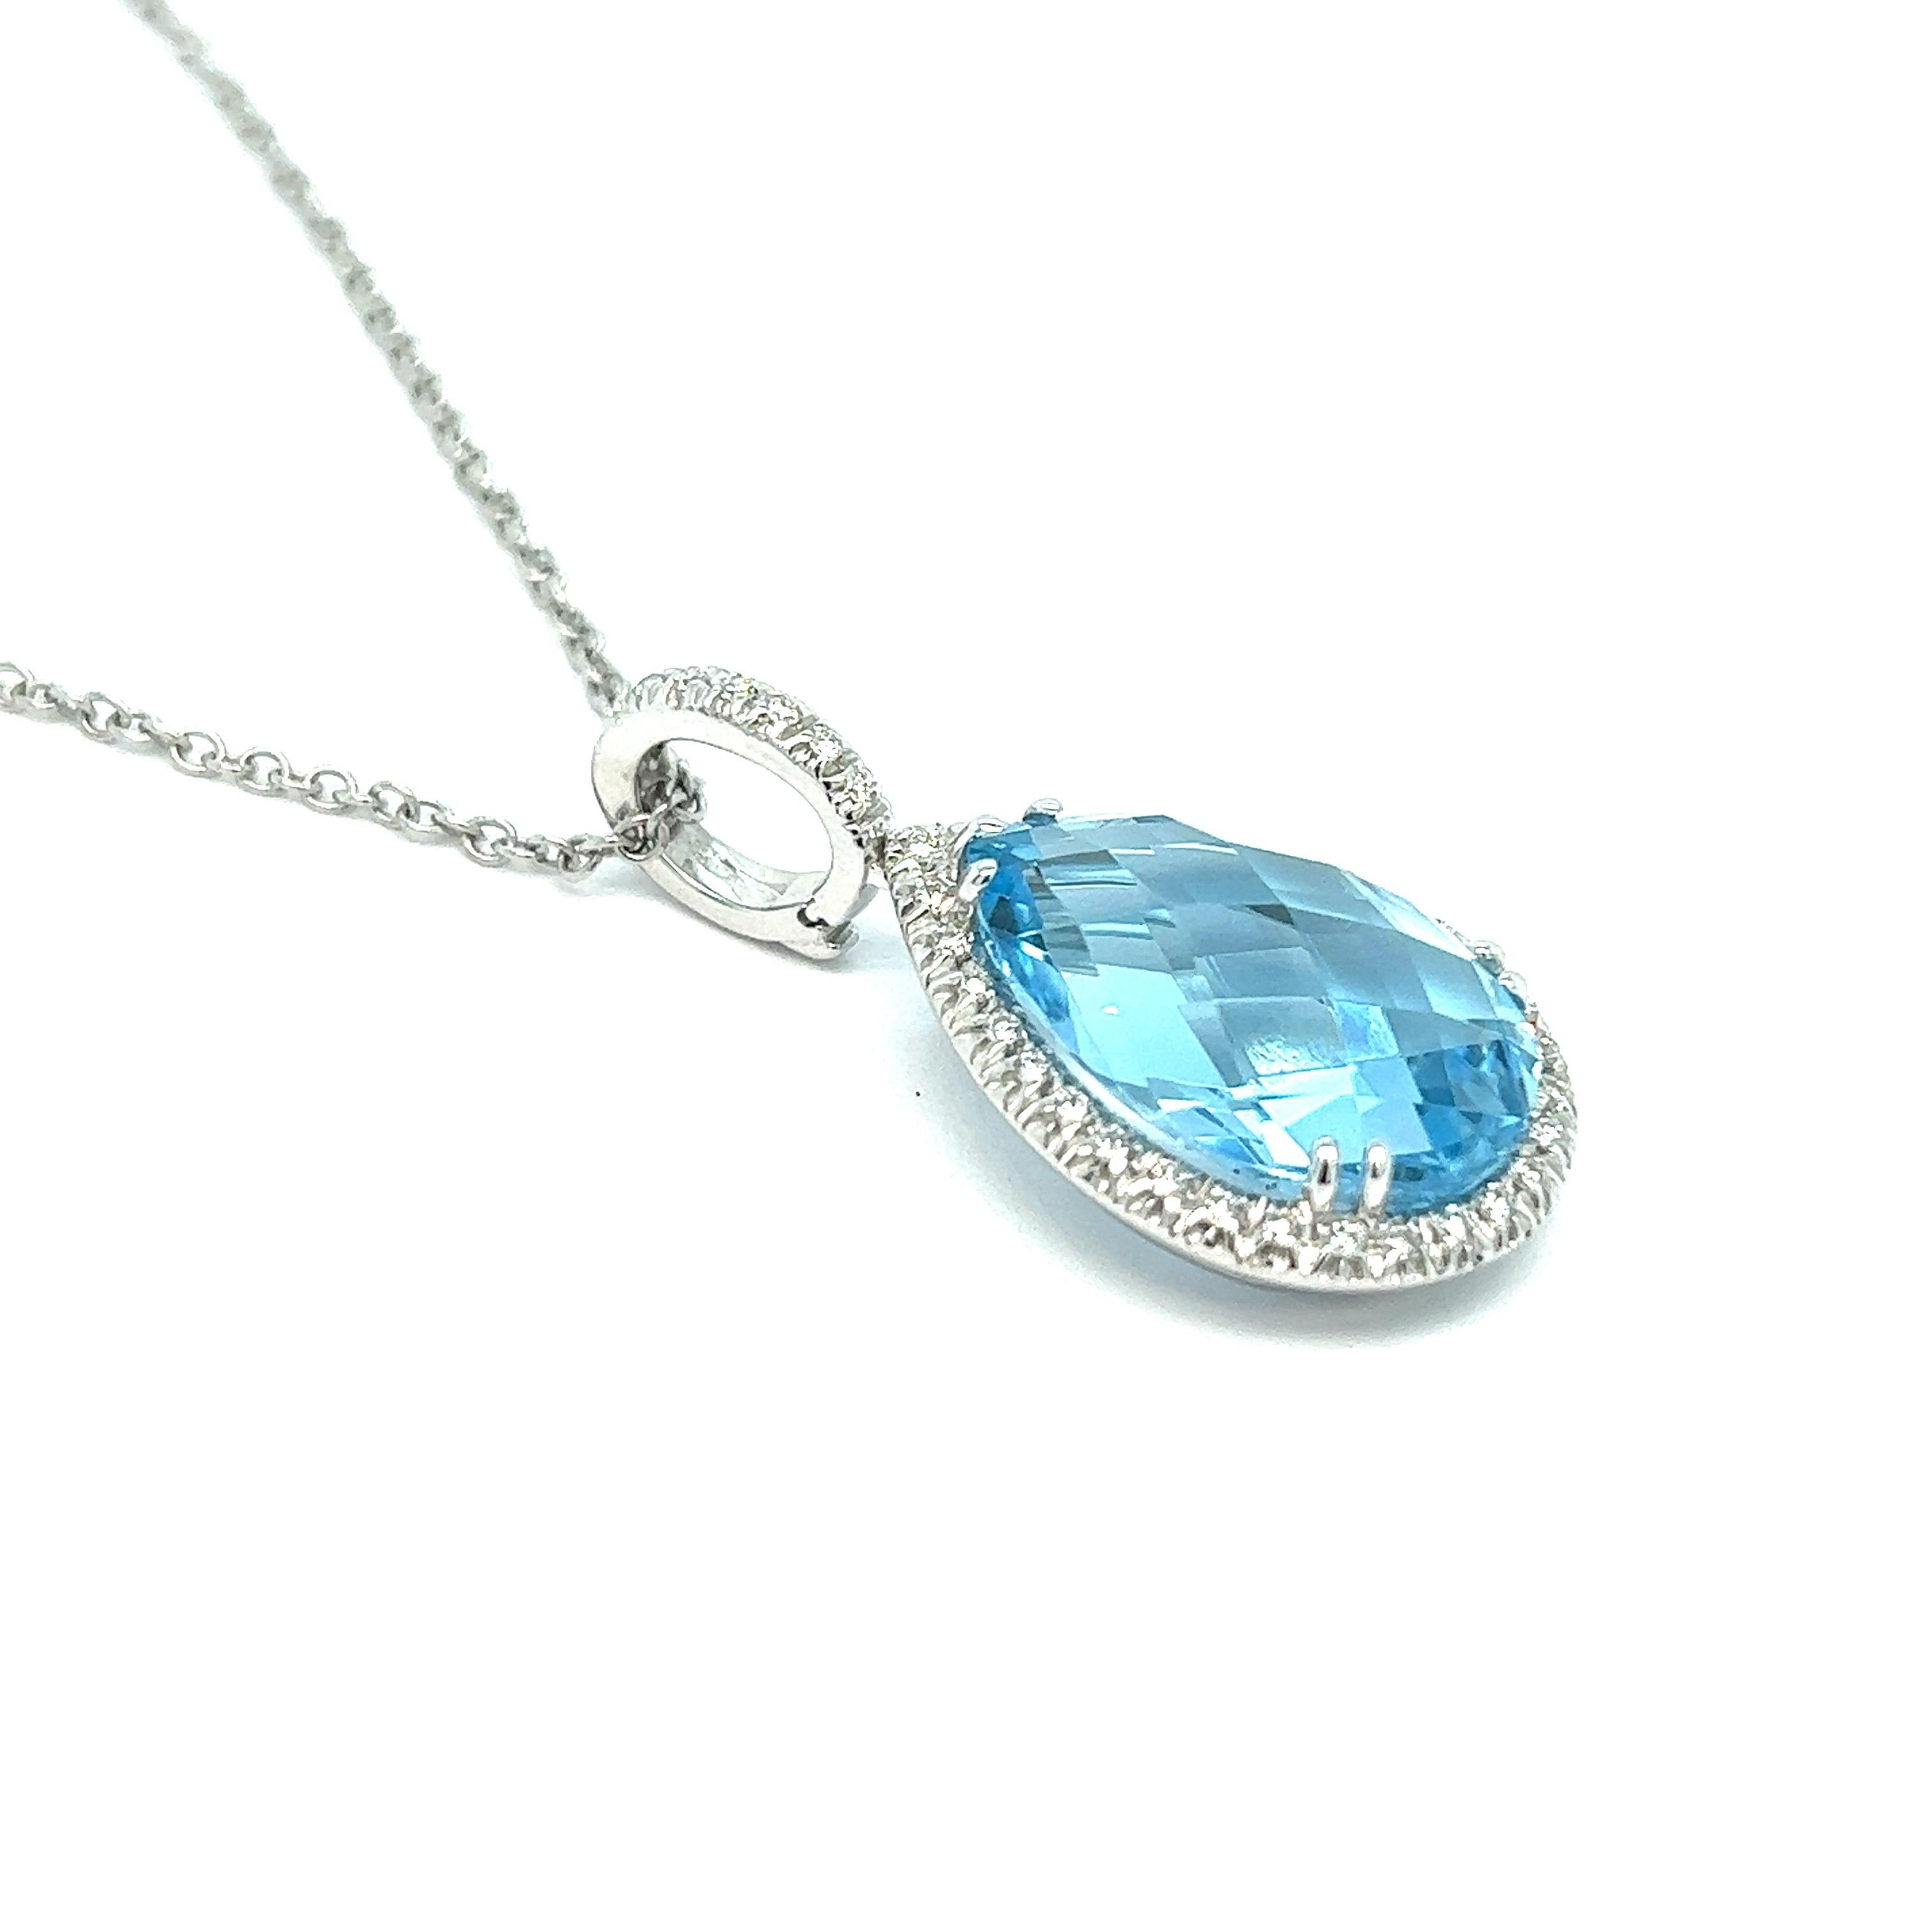 Aquamarine diamond pendant necklace, made in Italy

Pear shaped briolette-cut aquamarine of approximately 15 carats (12x18mm), round-cut diamonds of 1 carat, 18 karat white gold; chain marked 750

Size: pendant width 0.63 inch, length 1.25 inches;